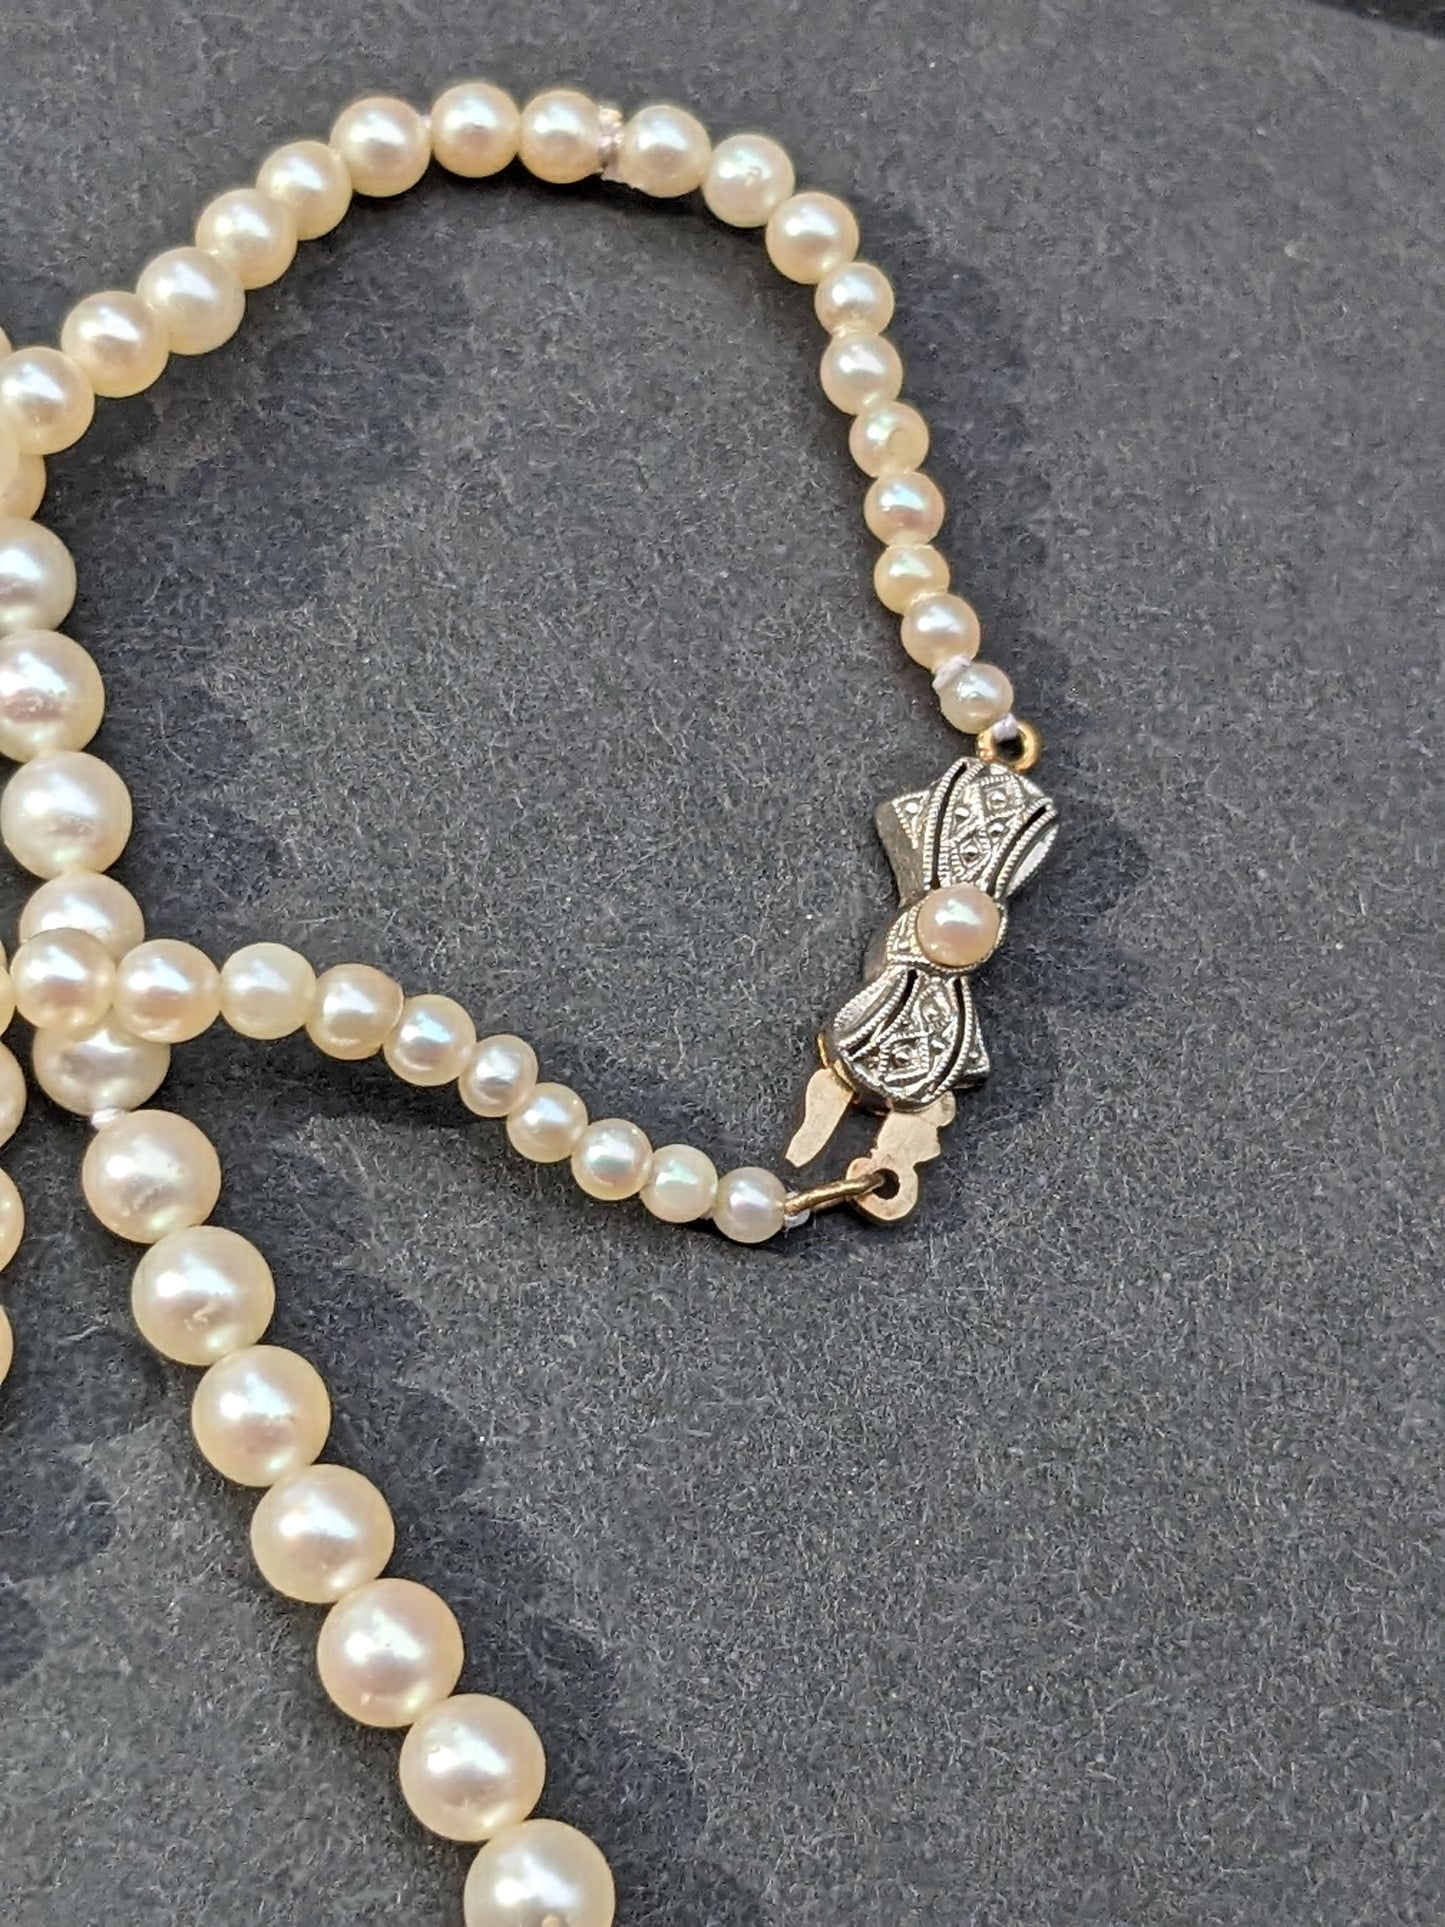 14K Antique Graduated Pearl Necklace with Bow Clasp